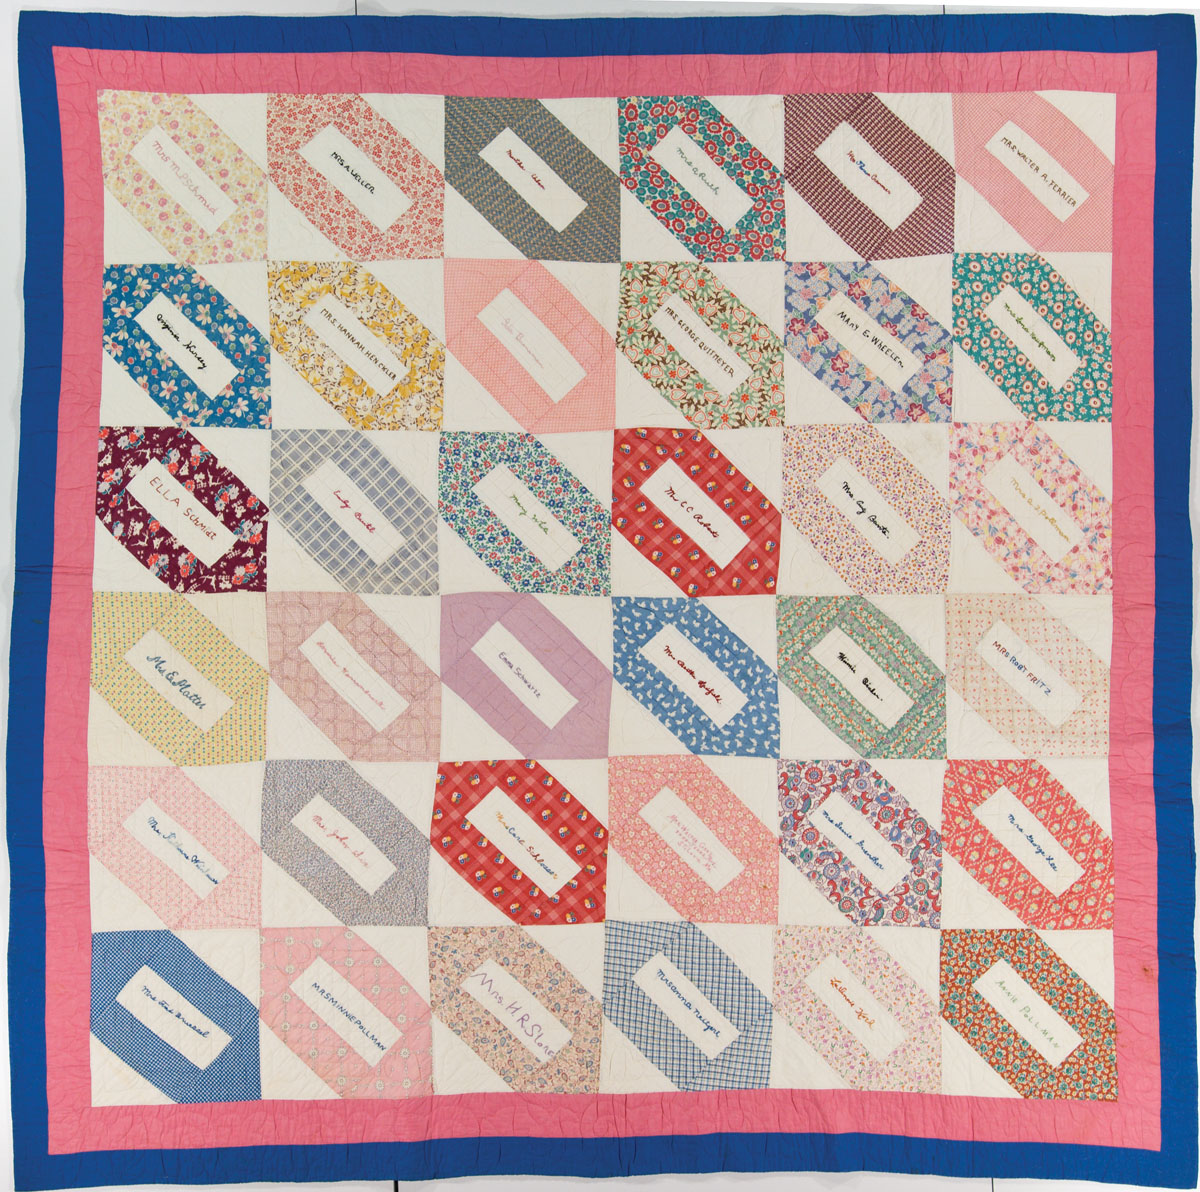 http://worldquilts.quiltstudy.org/americanstory/sites/default/files/1997_007_0738.jpg